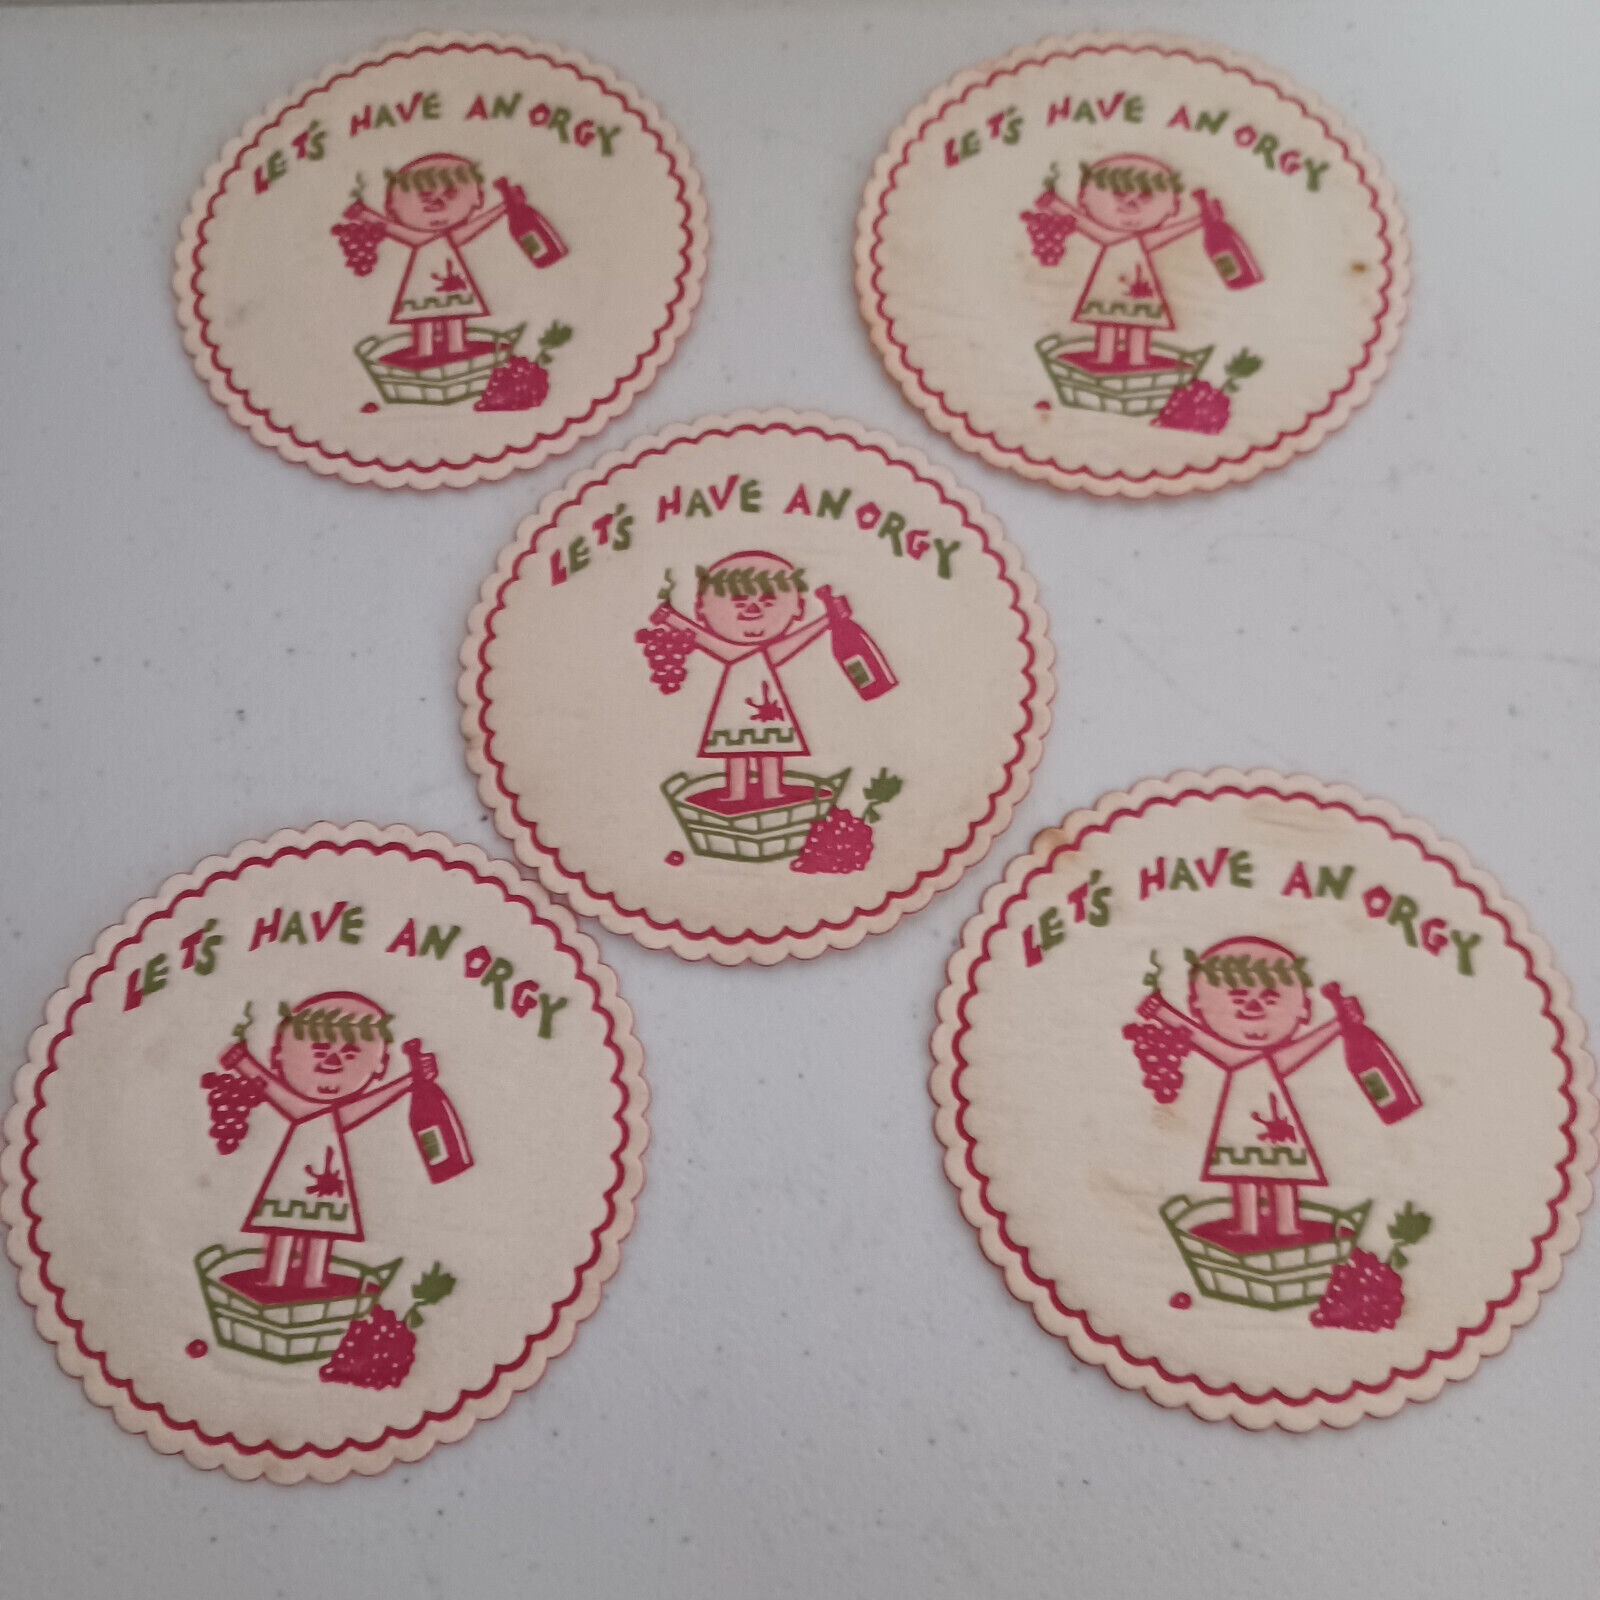 Let’s Have An ORGY Paper Mid Century Party Coasters Set of 5 MCM Vintage Bar